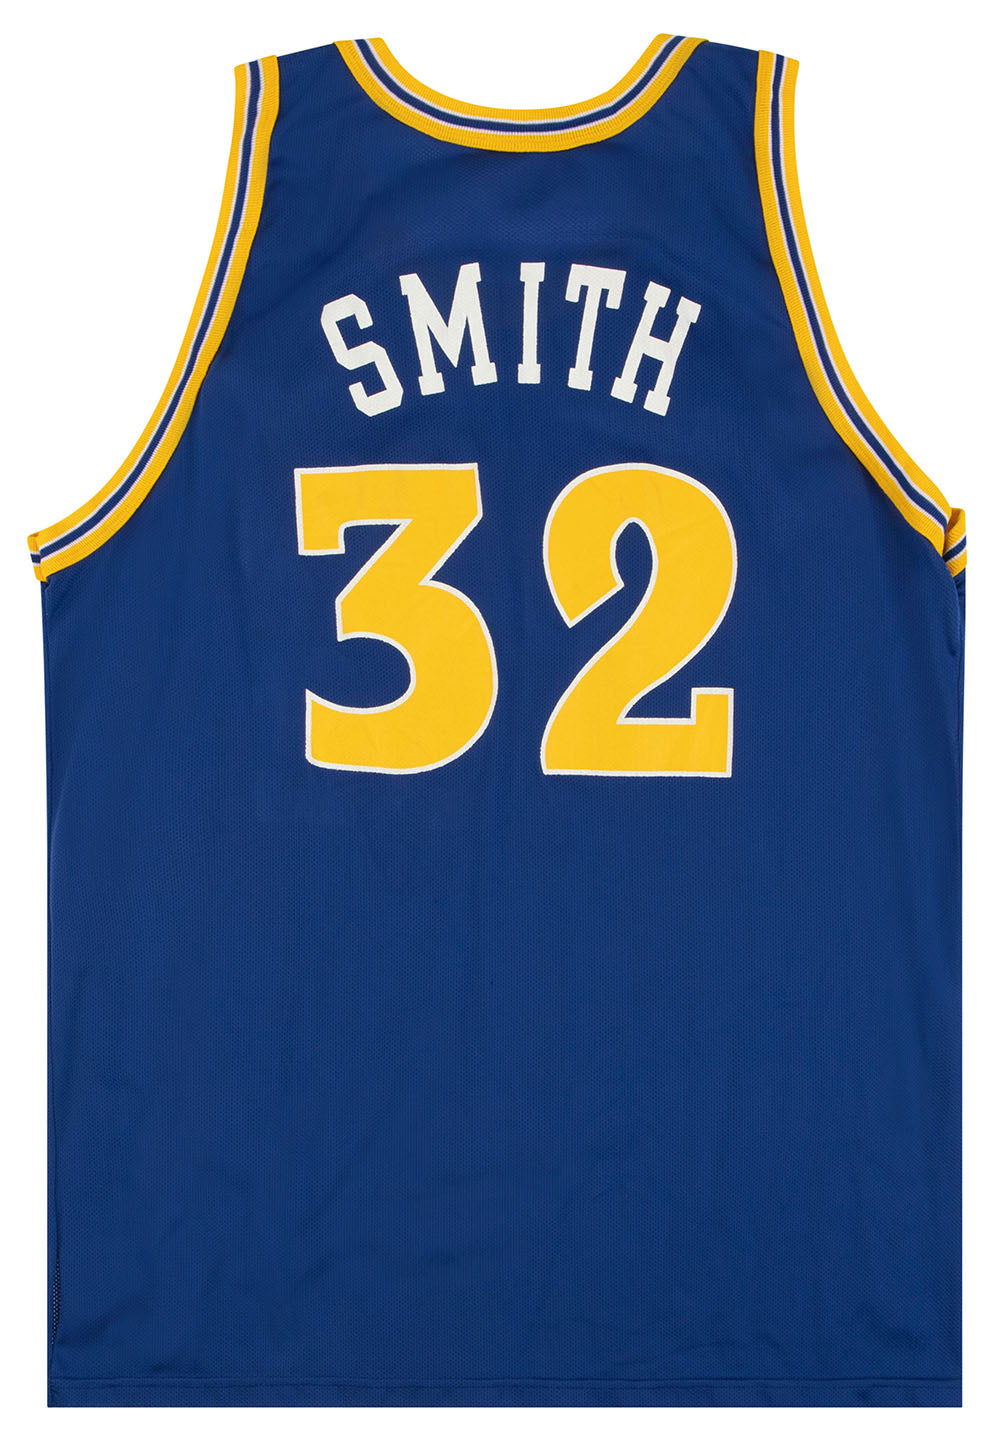 1995 GOLDEN STATE WARRIORS SMITH #32 CHAMPION JERSEY (AWAY) S